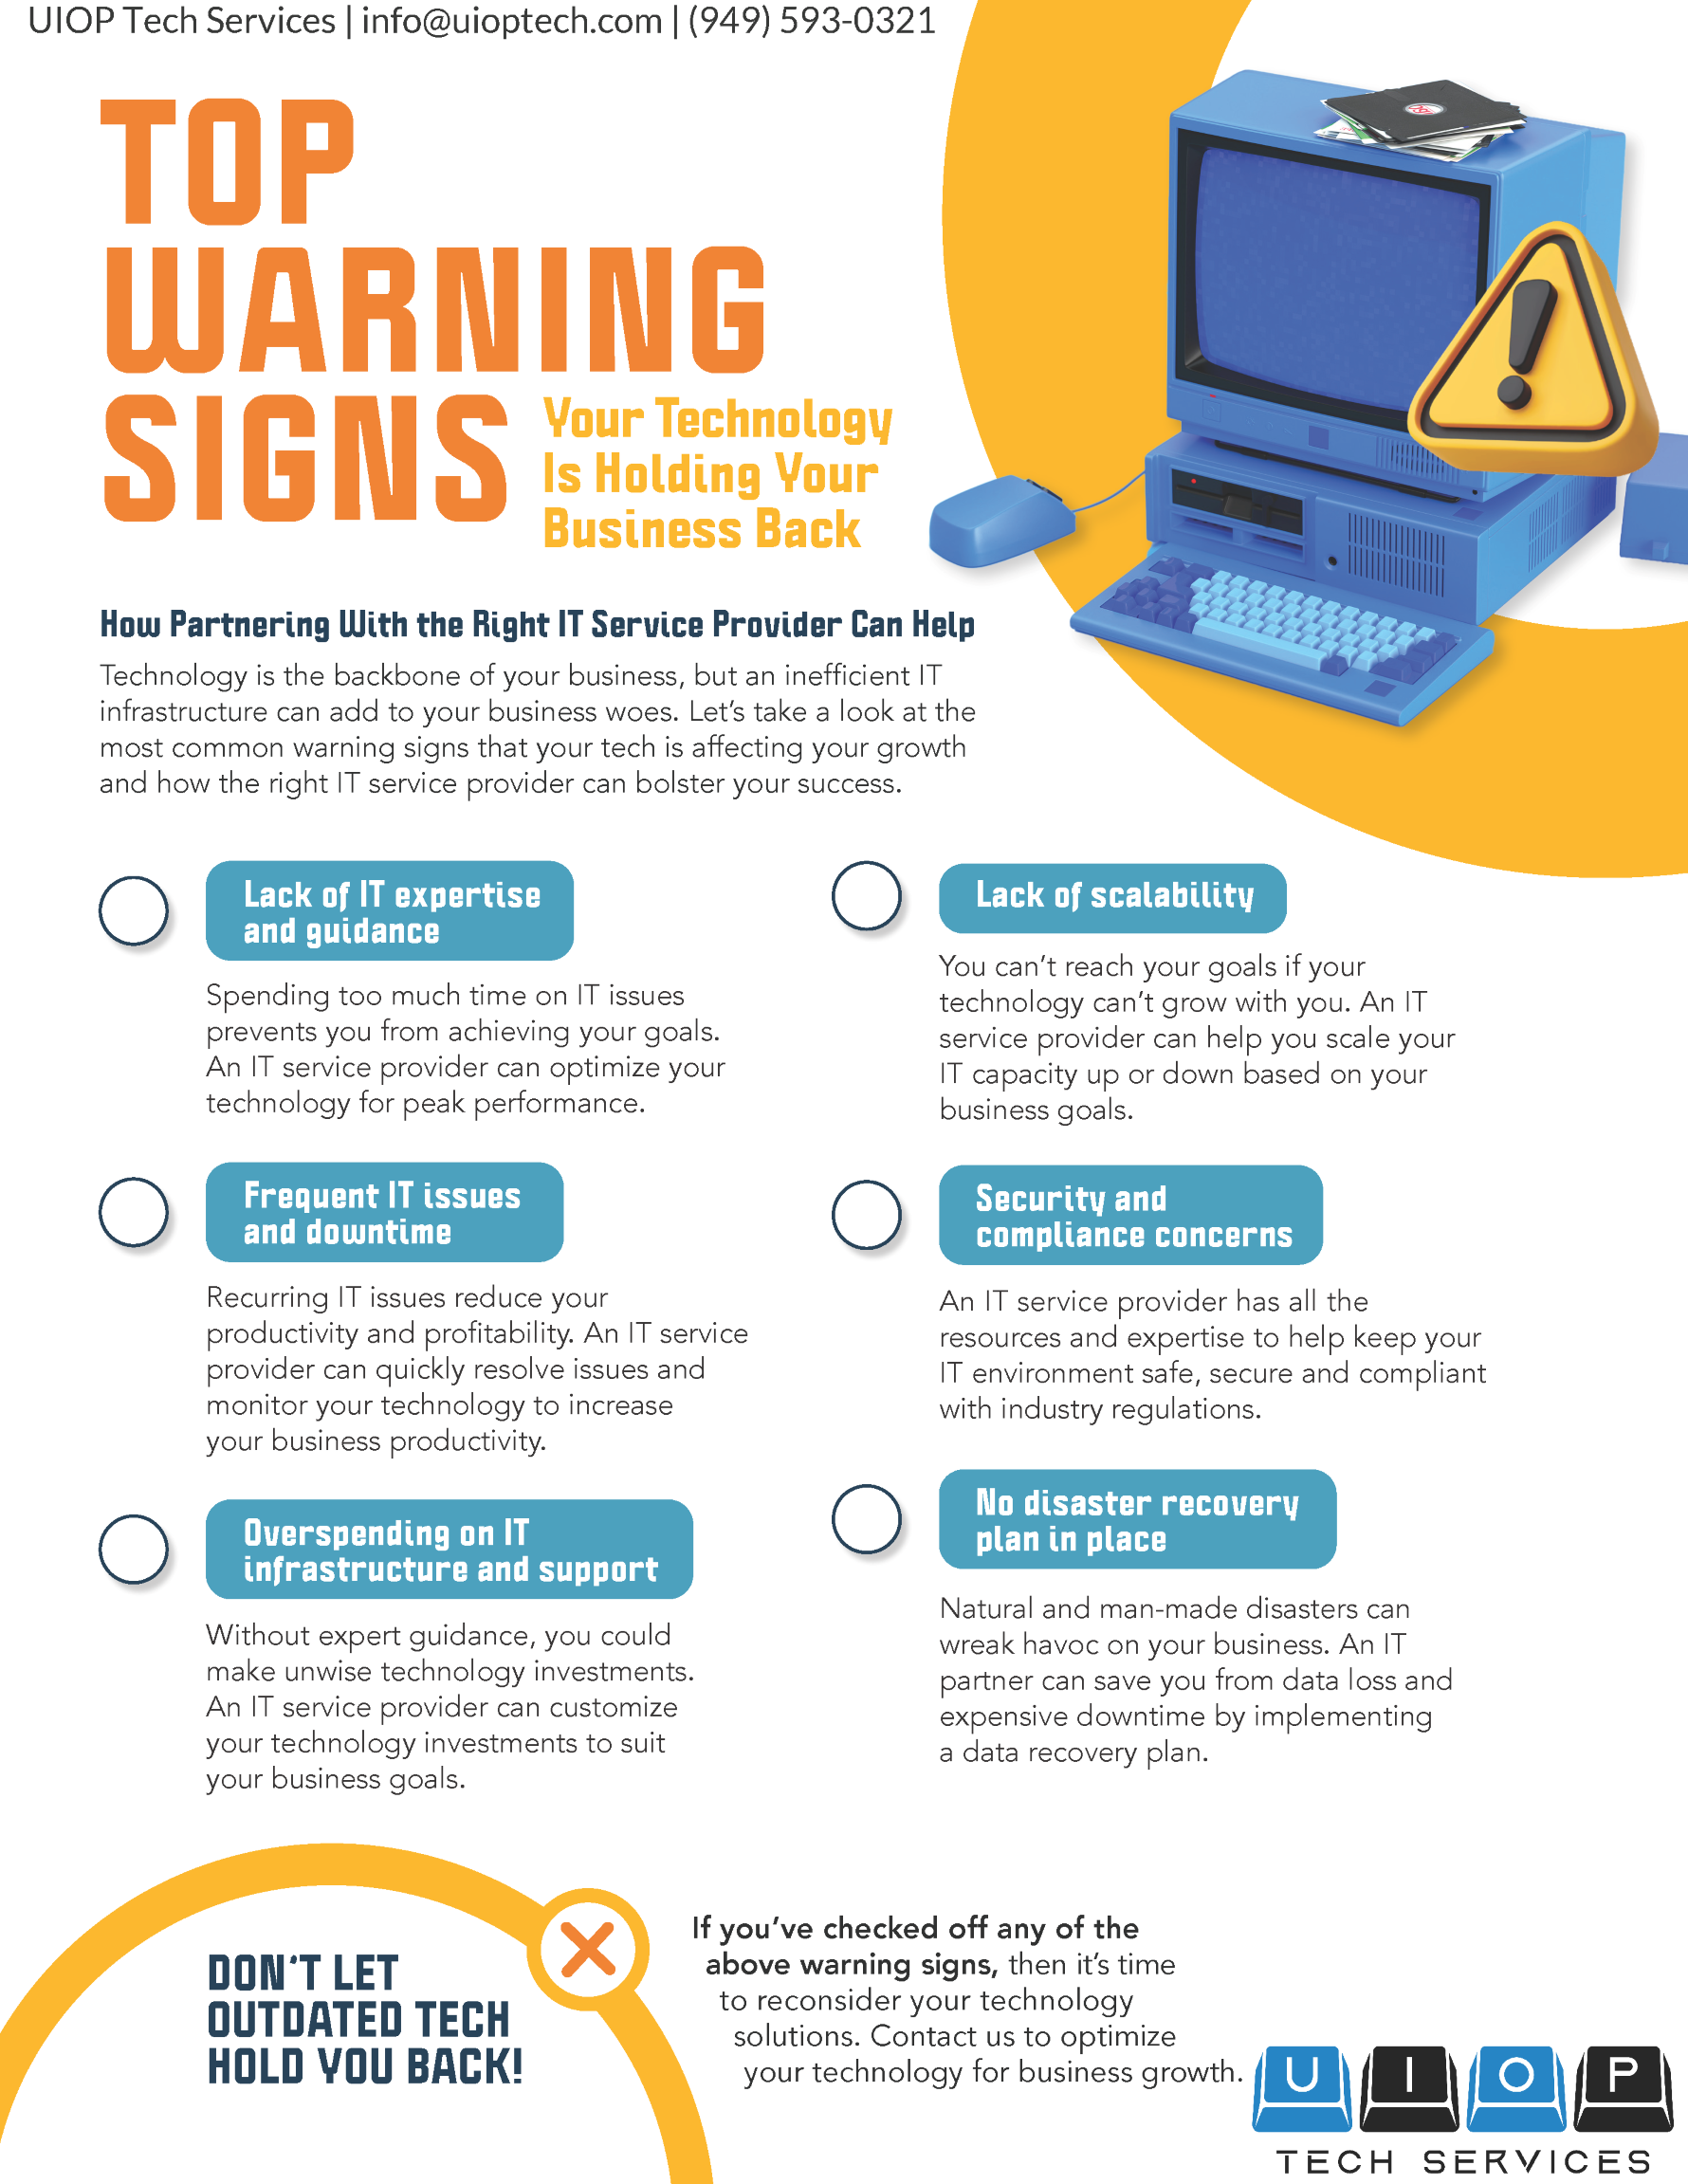 Checklist: Top Warning Signs Your Technology Is Holding Your Business Back